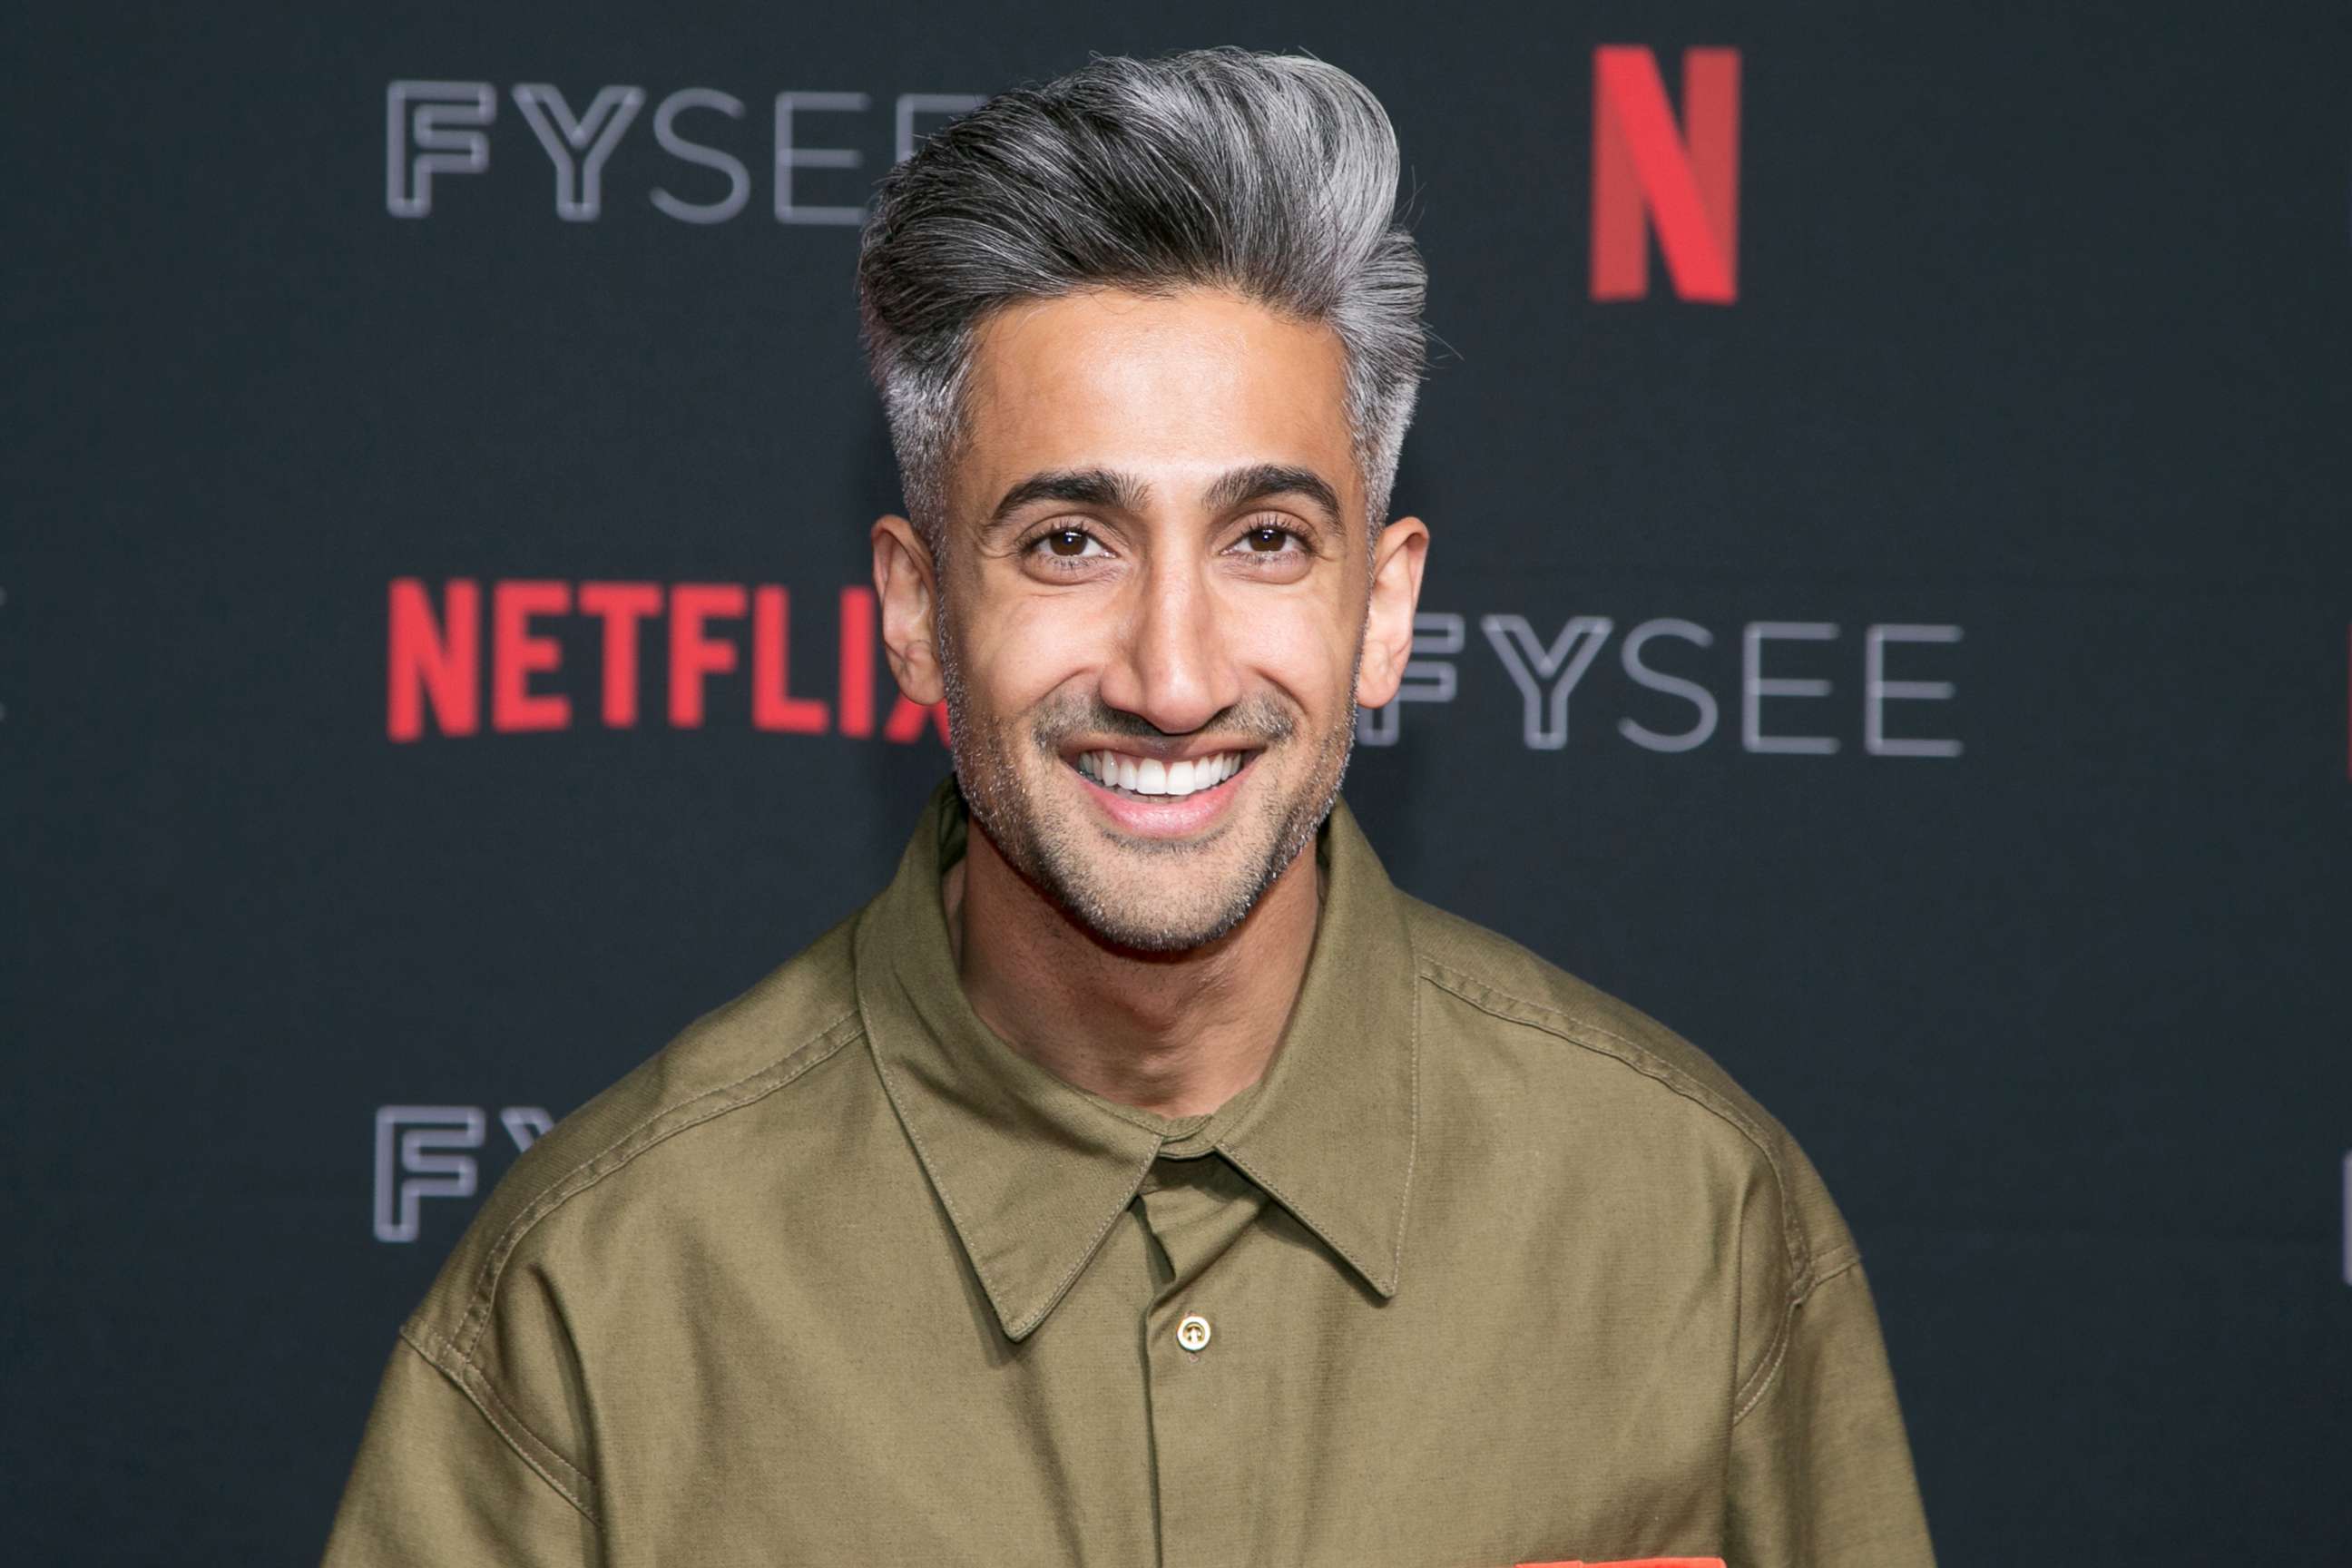 PHOTO: Tan France attends the #NETFLIXFYSEE Event For "Queer Eye" at Netflix FYSEE At Raleigh Studios on May 31, 2018 in Los Angeles.